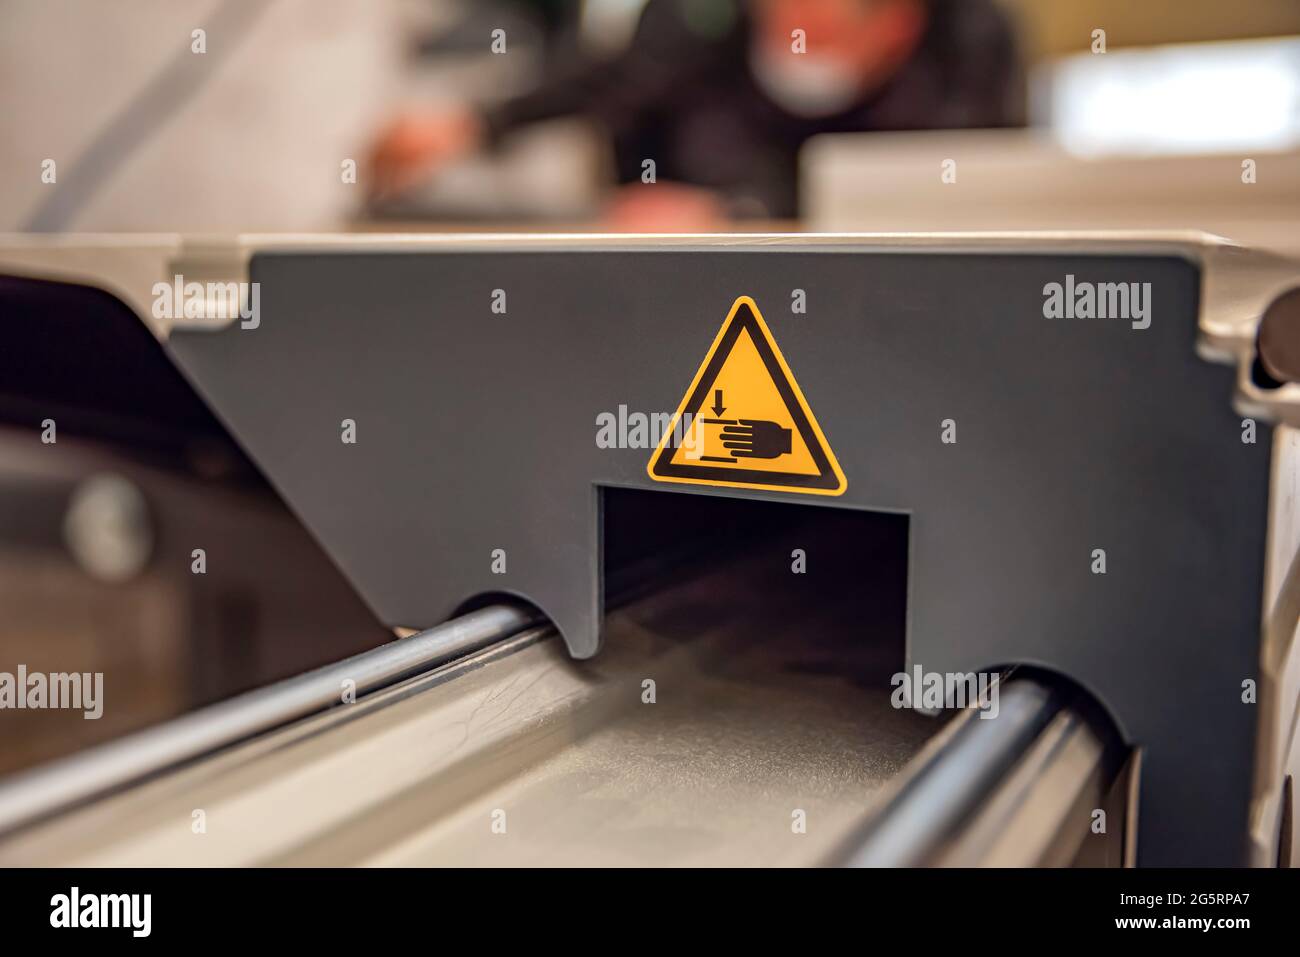 A warning sign on a woodworking machine. Production safety in a carpentry workshop. Hazard sign of moving parts in yellow triangle with hands Stock Photo